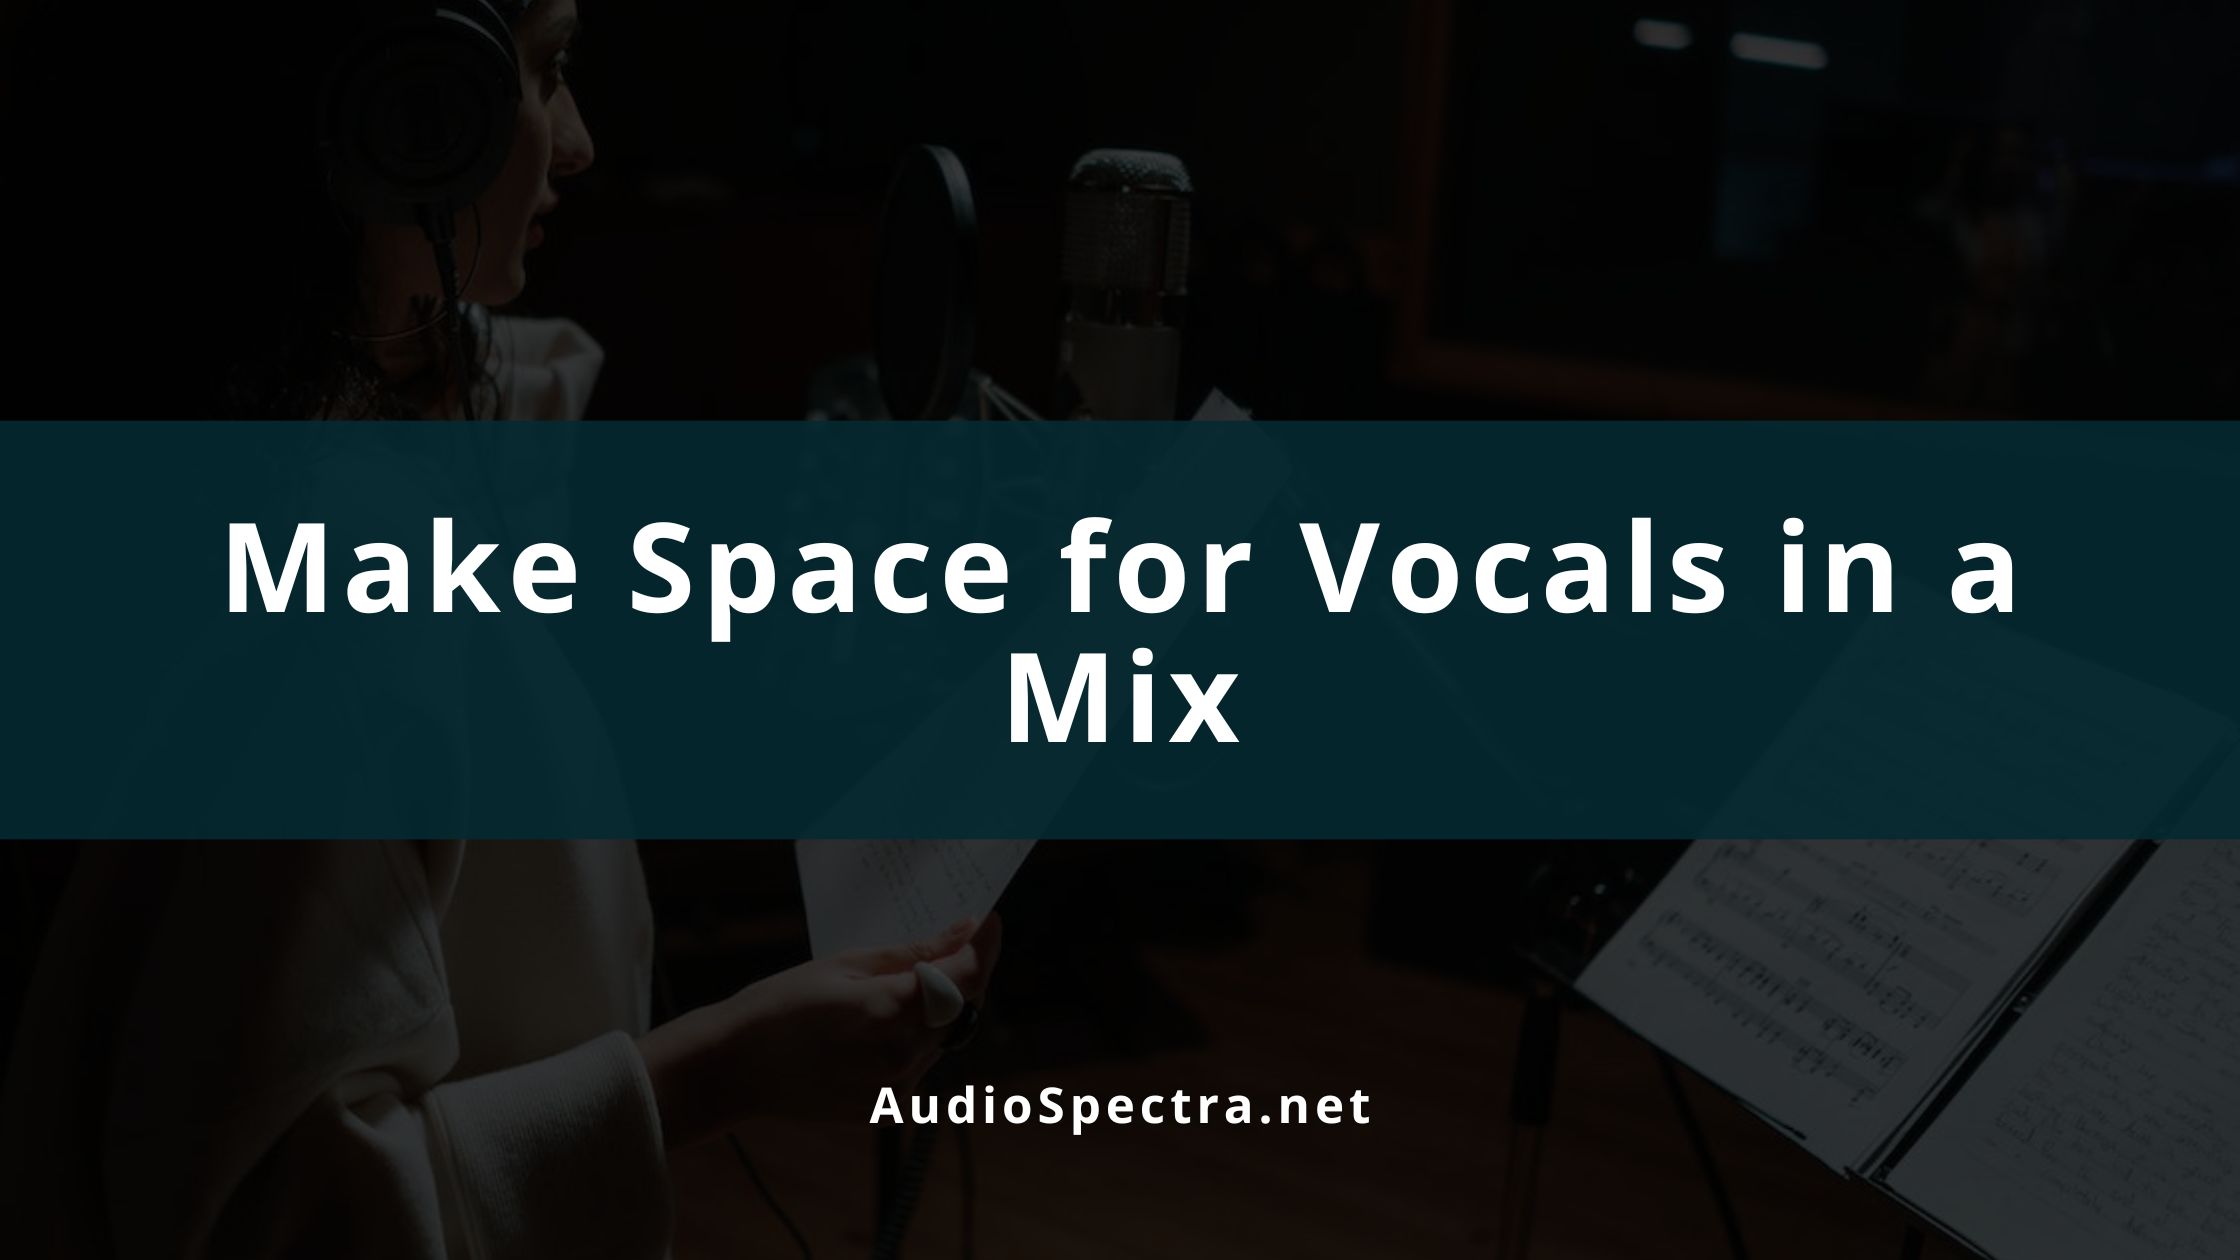 How to Make Space for Vocals in a Mix